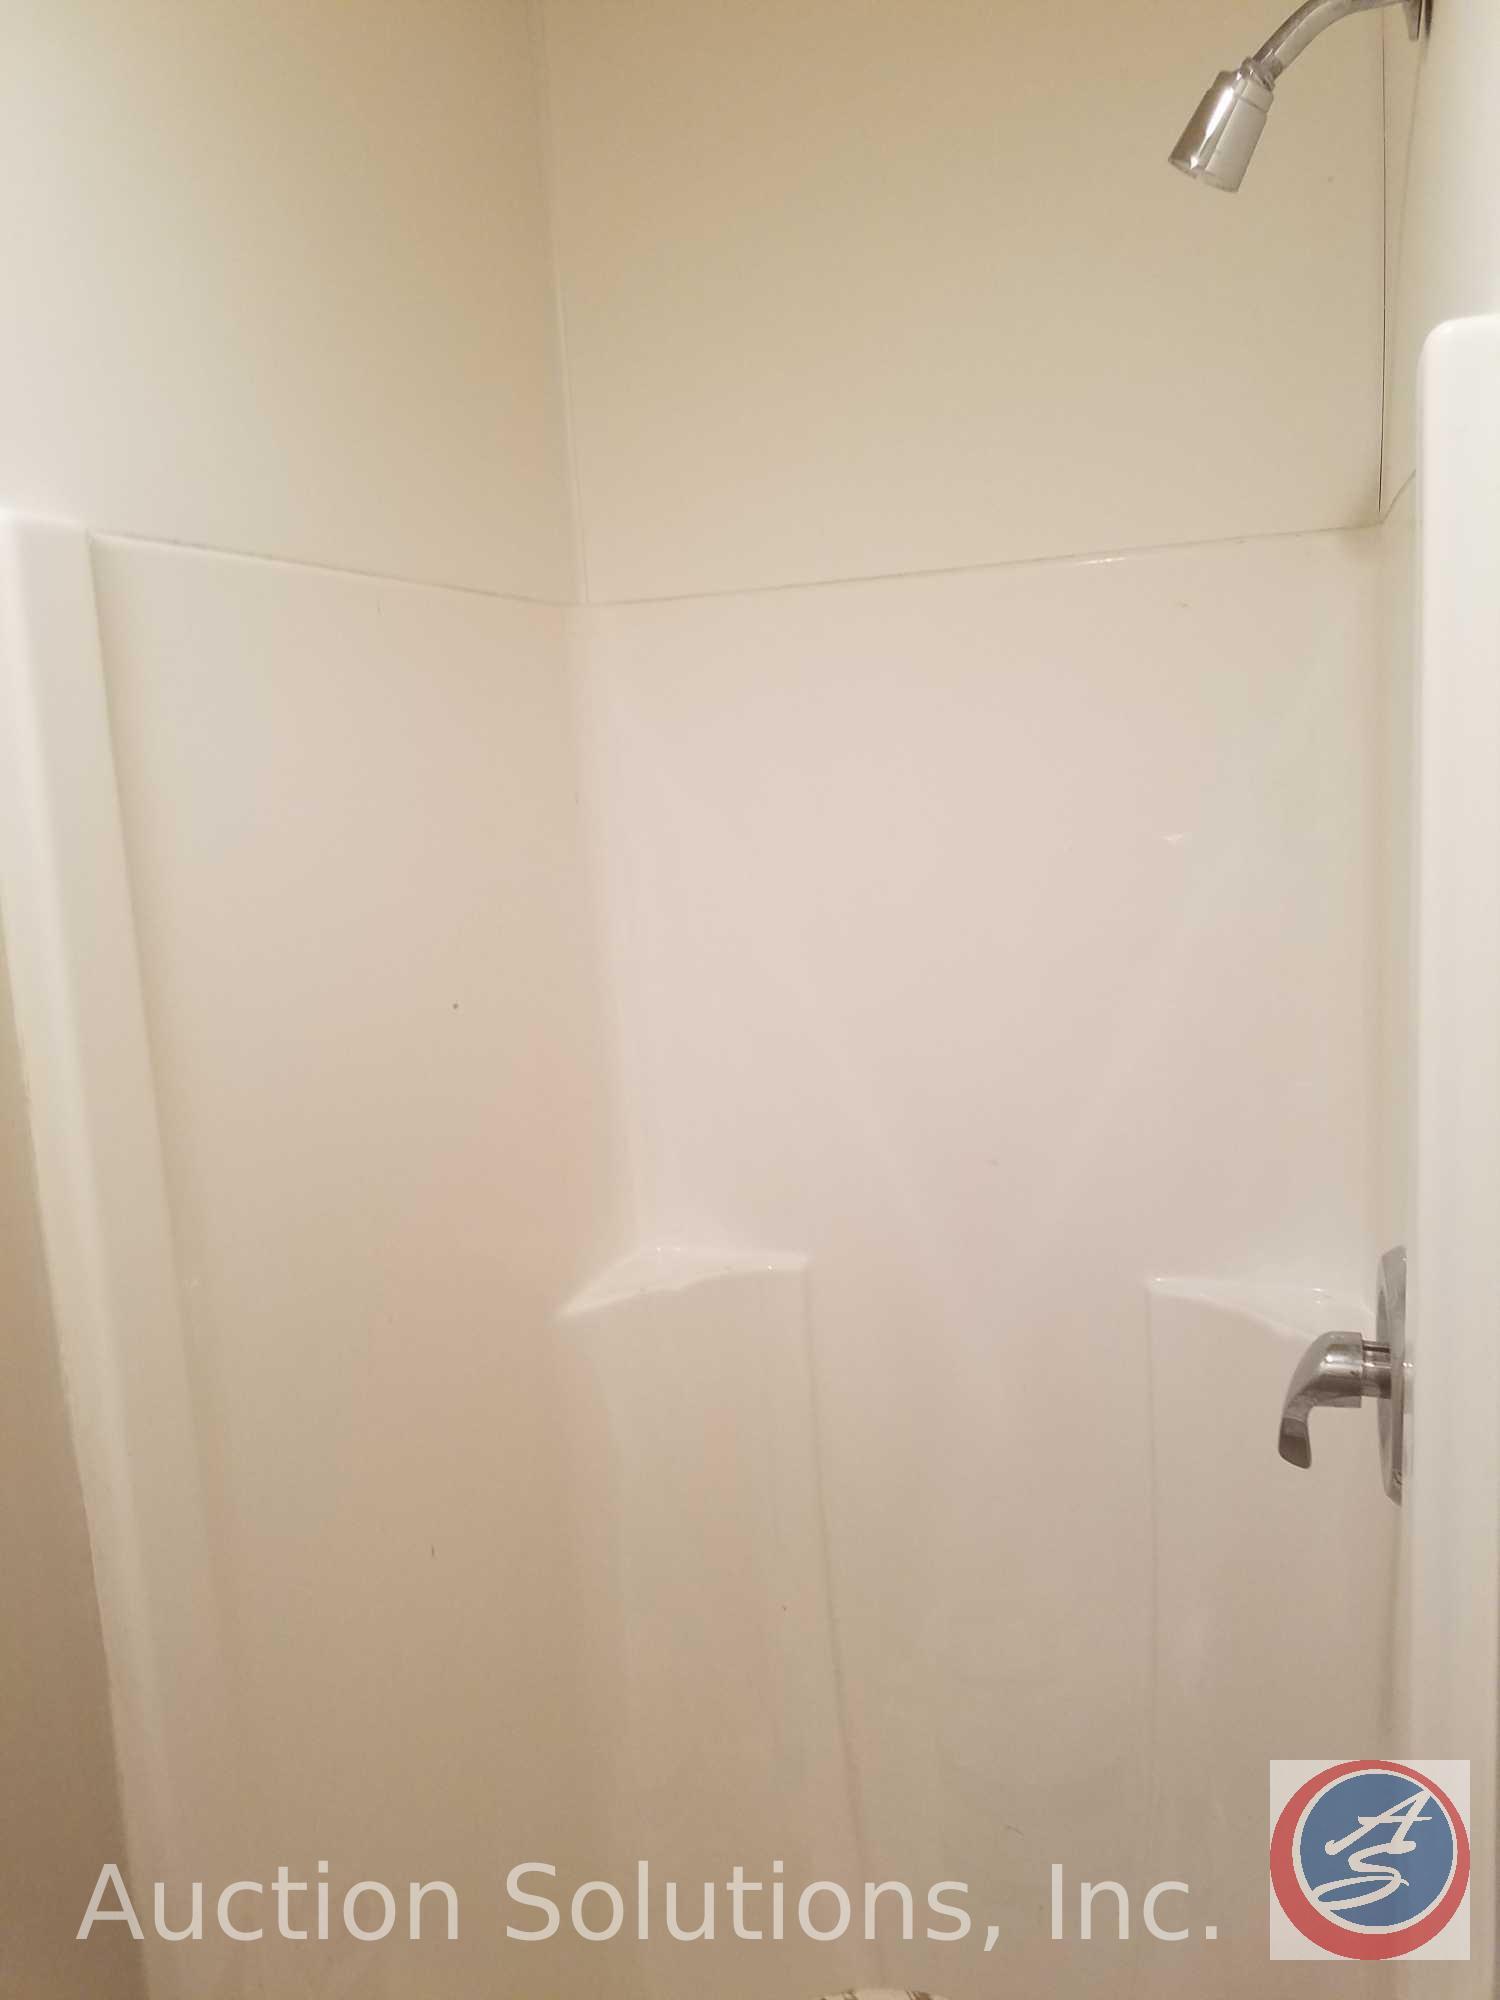 Salvage rights to Basement Bathroom including; Cabinets, Mirror, Sink, Toilet, Shower, Lighting